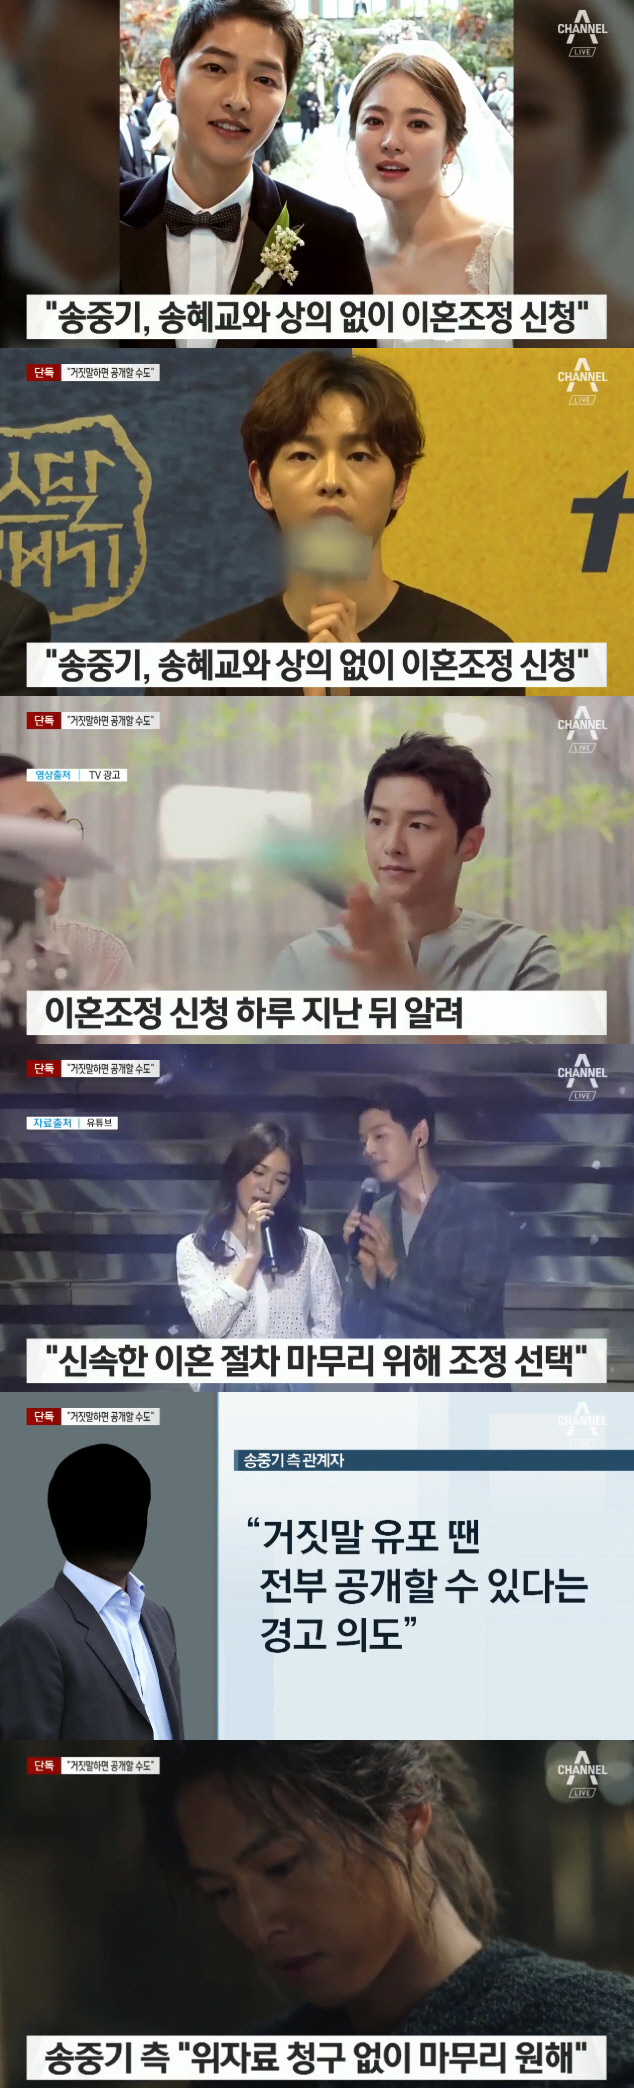 Channel A reported on the 28th, It has been confirmed that Song Hye-kyo has applied for divorce mediation without consulting.Song Joong-kis decision to divorce Song Hye-kyo is a smooth choice and the intention to finish the divorce process is contained, the media said.Song Joong-ki said, There is an intention to give Song Hye-kyo the warning that if you spread lies such as marriage and divorce background, you can disclose everything.Some interpreted it as a kind of warning not to make unnecessary noise.The two sides are currently agreeing on the divorce itself, but are coordinating on details. The divorce mediation case will be handled by the 12th Household Division (Jang Jin-young, the chief judge).The first adjustment date is expected at the end of July.